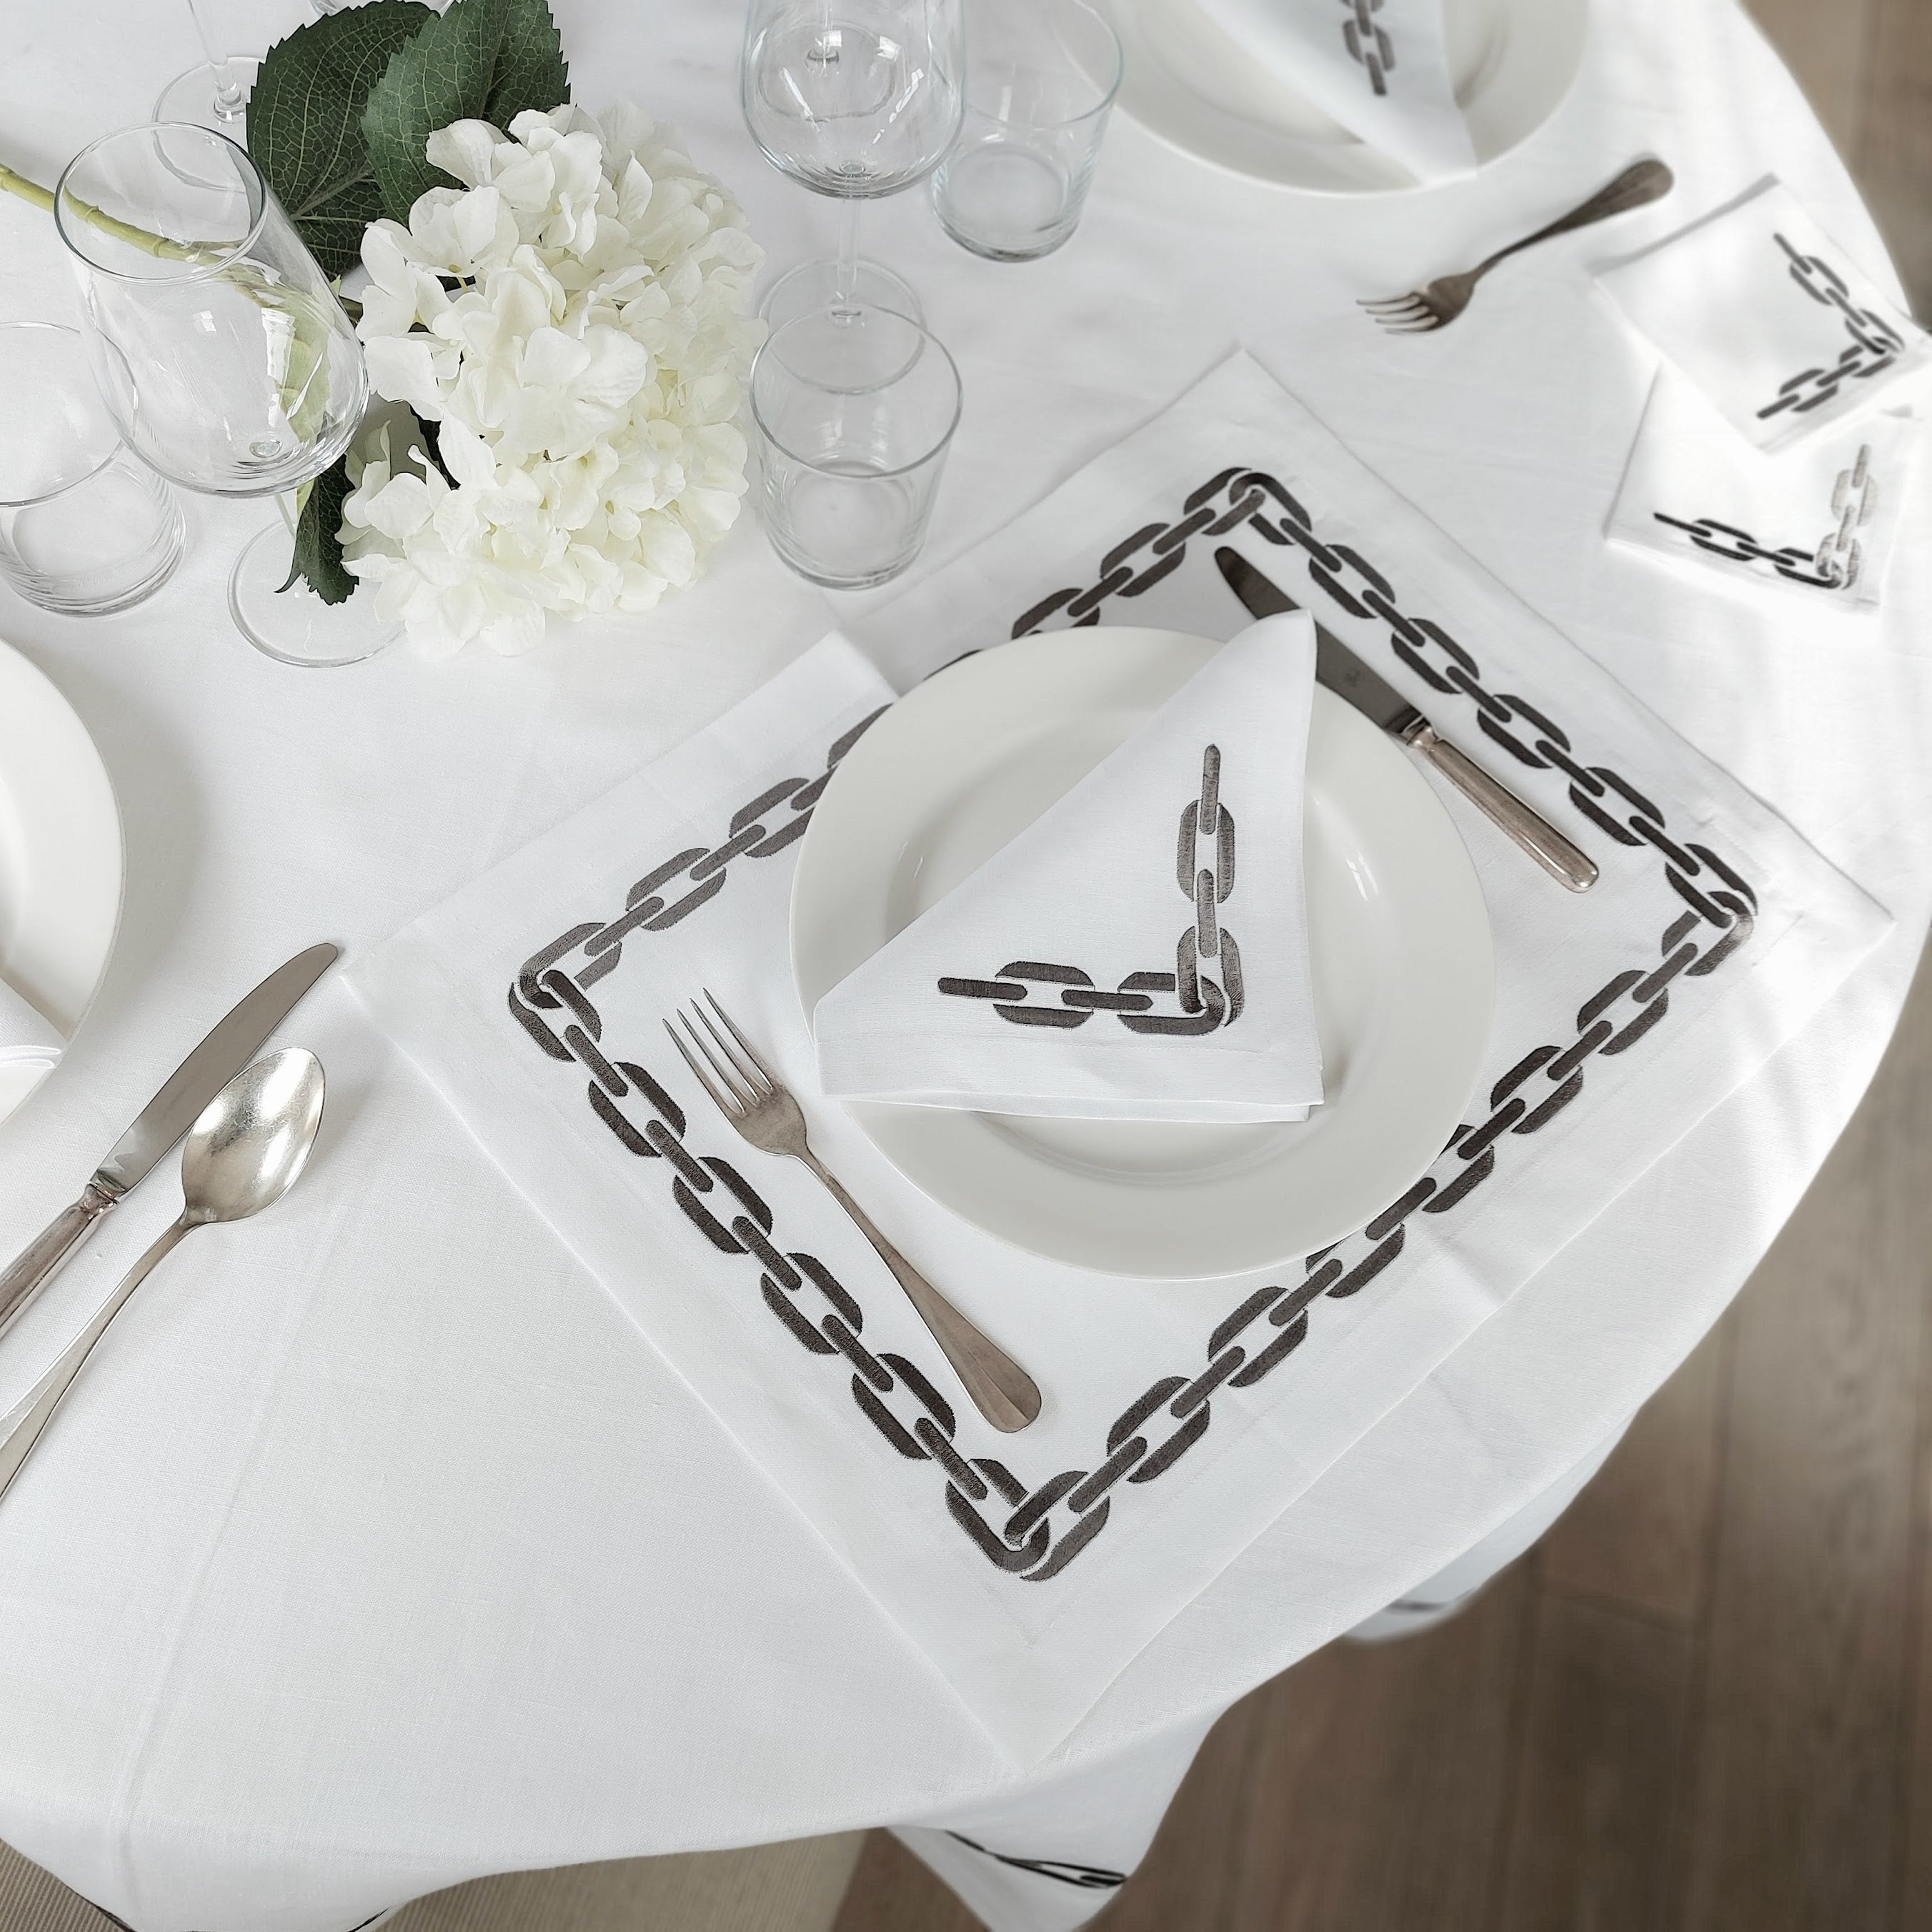 The Grey Chain Tablecloth